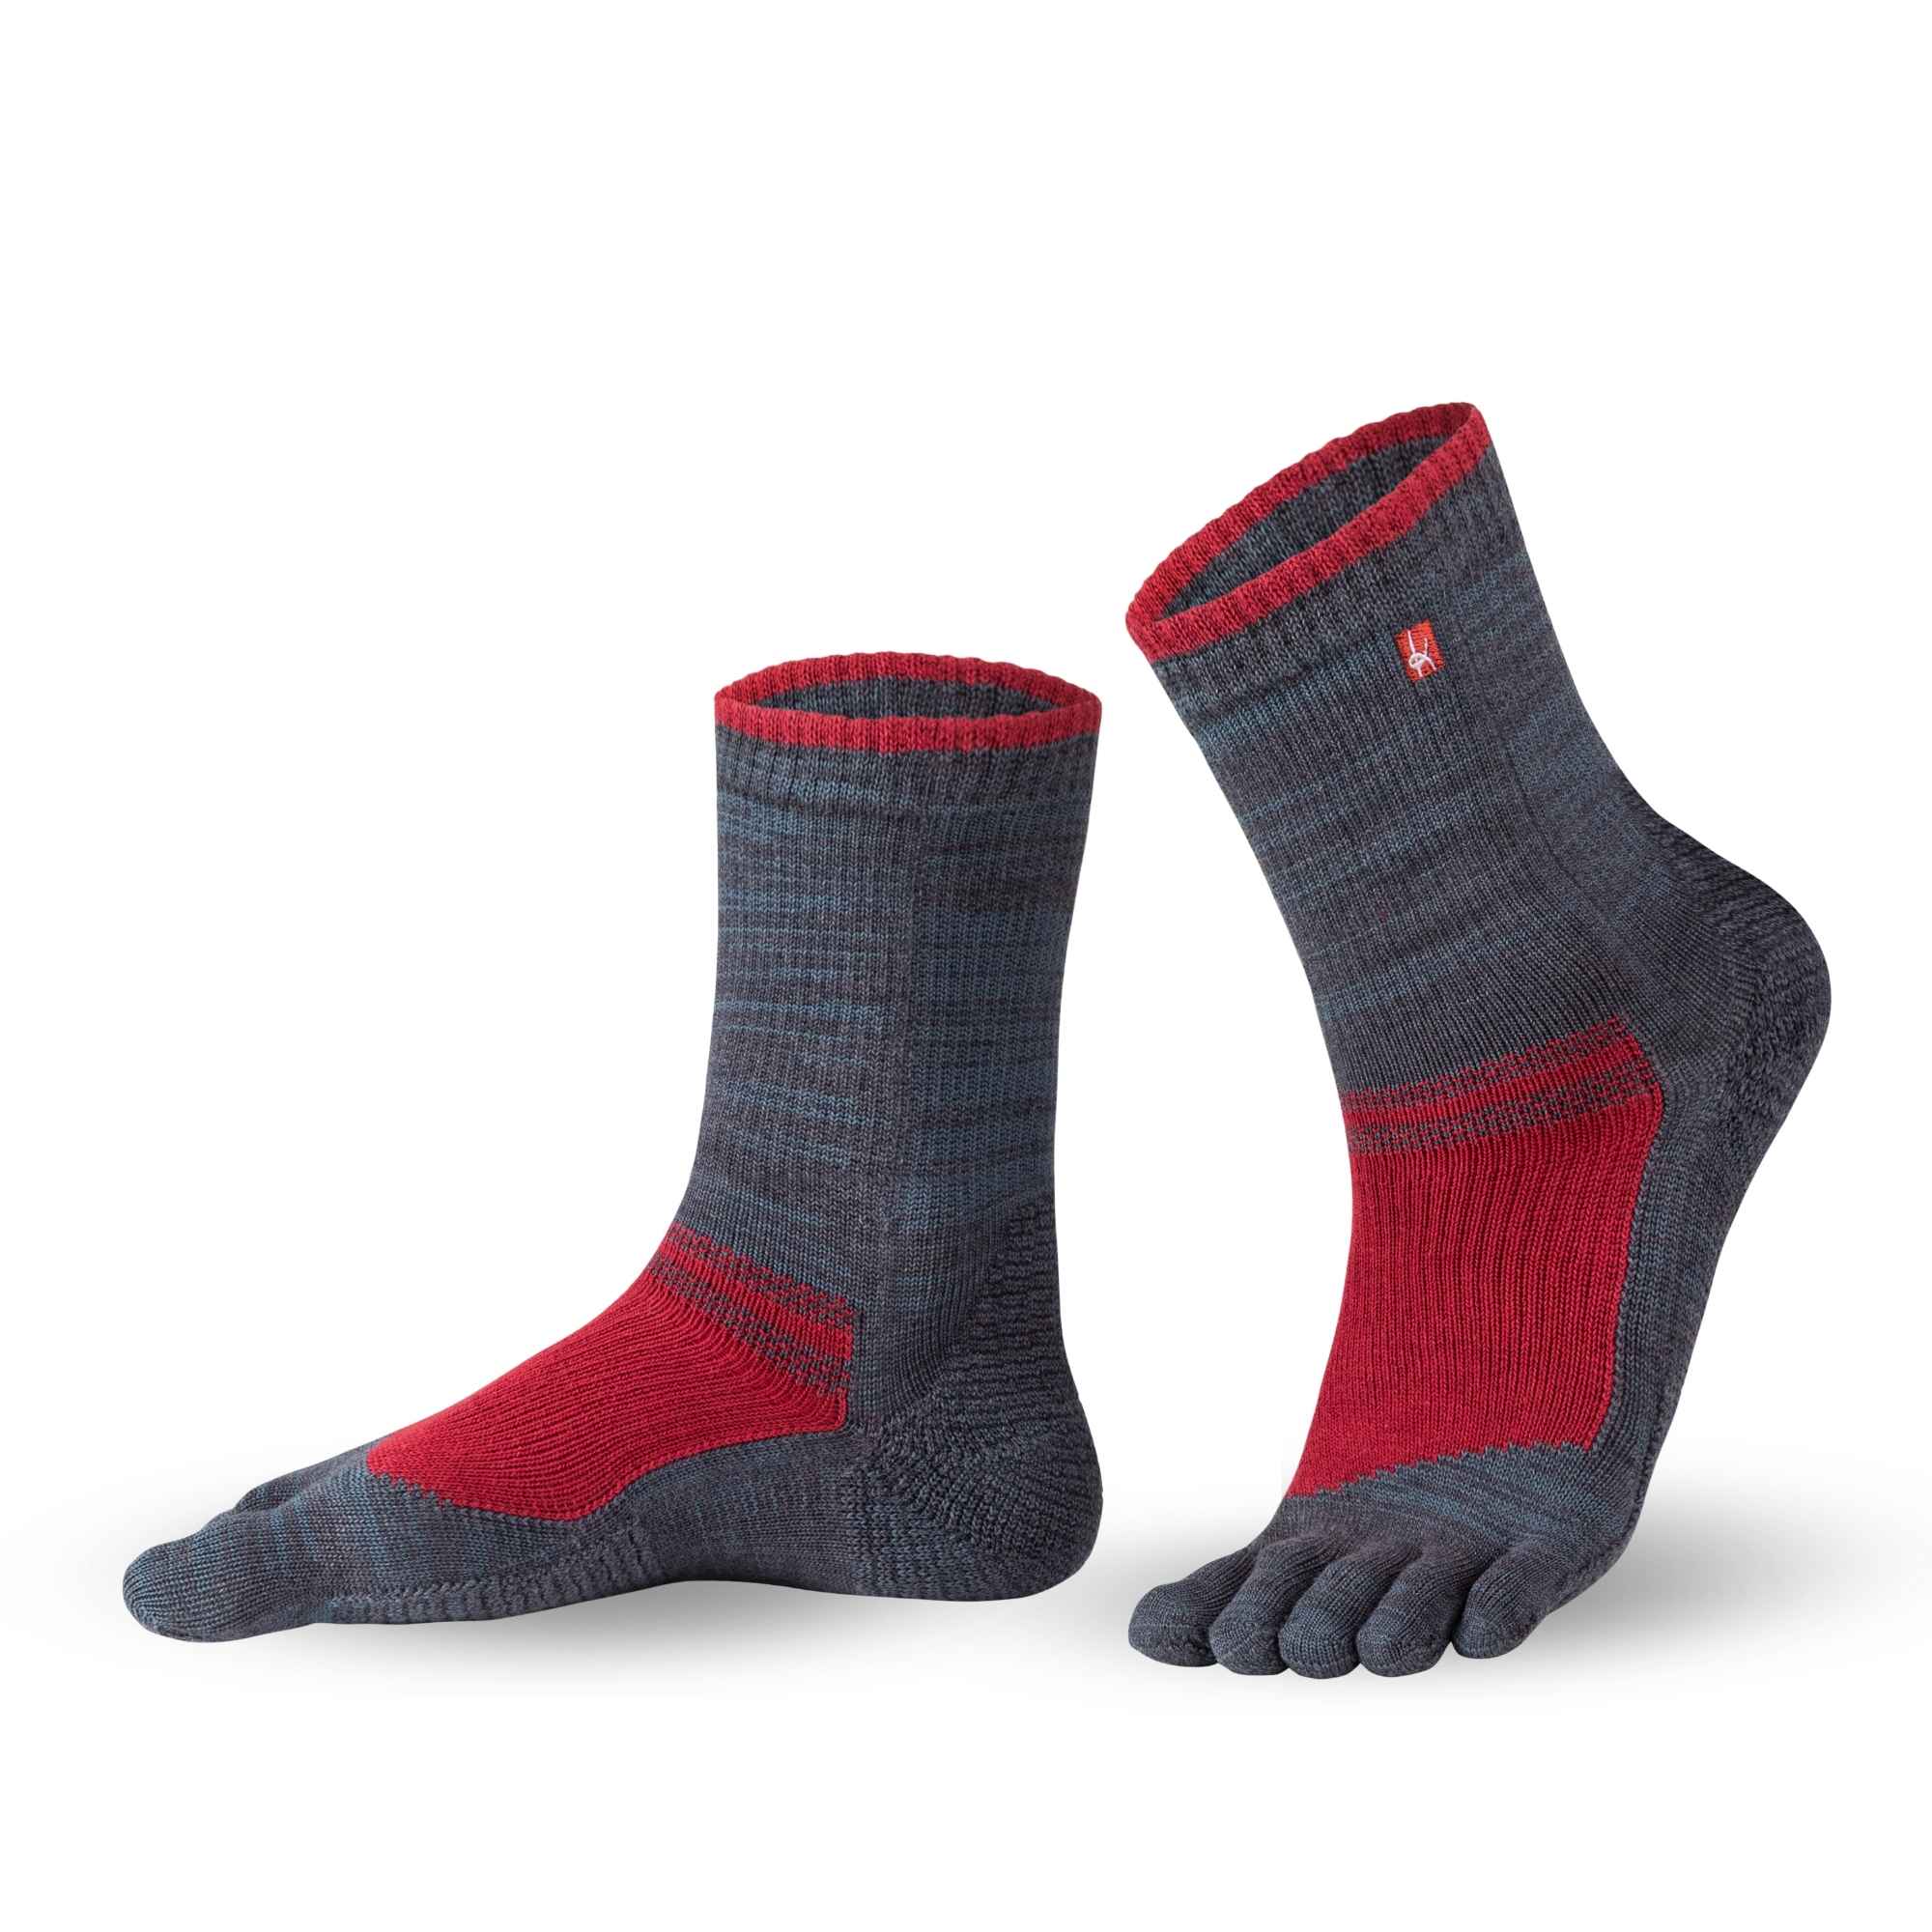 Hiking socks for medium to difficult routes, fit in hiking boots